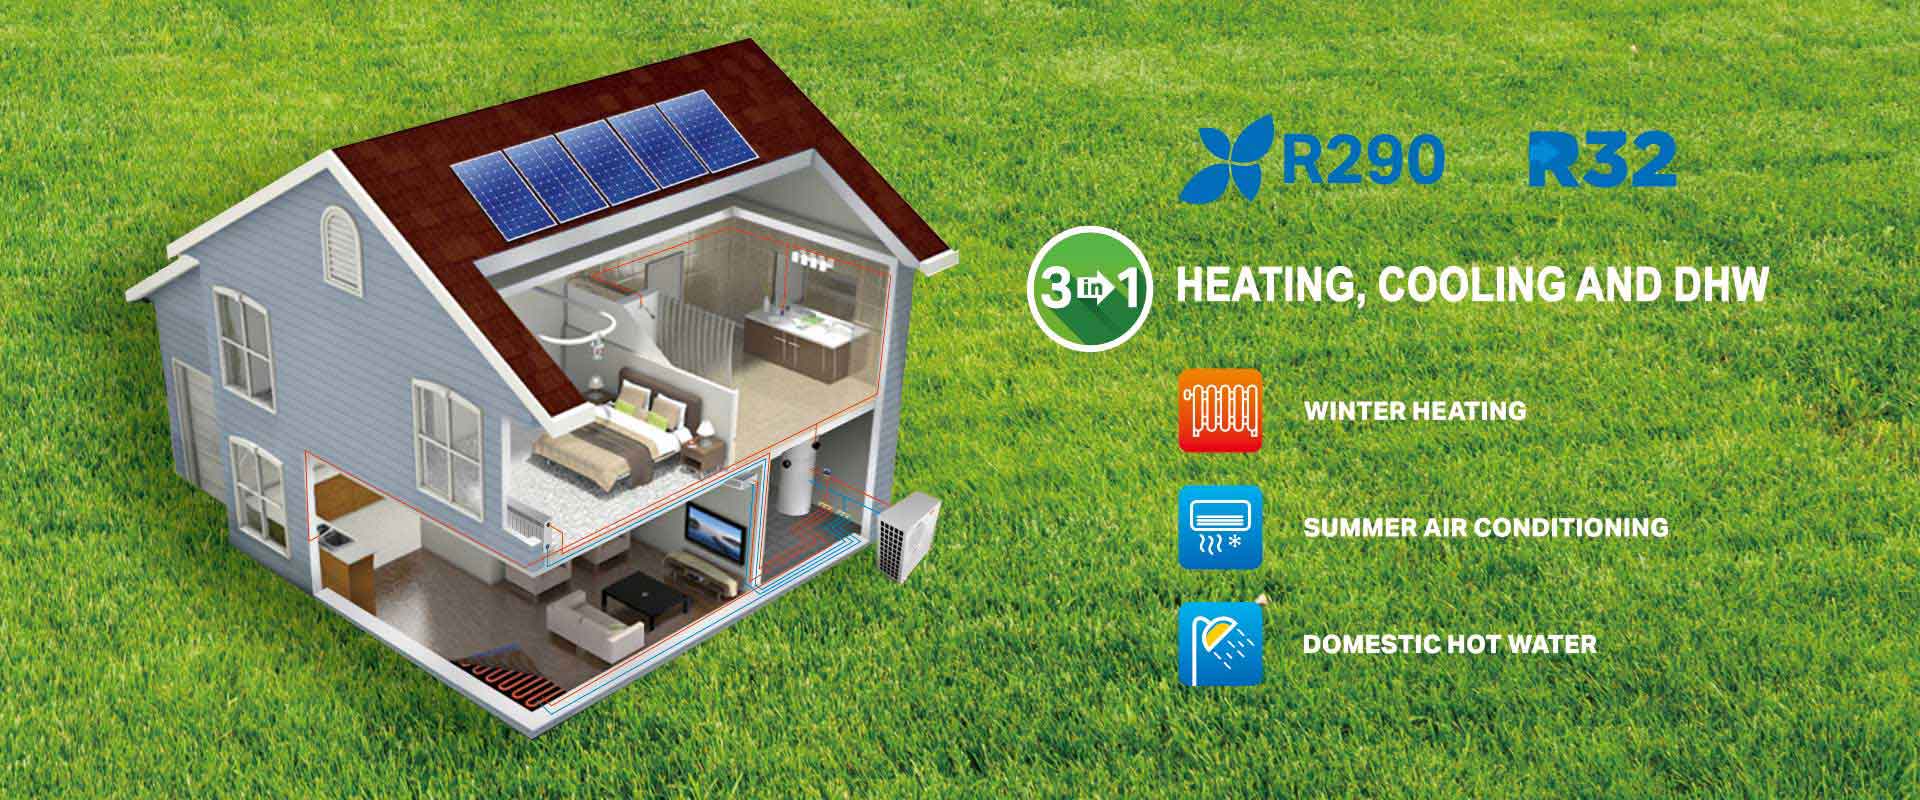 Affordable Heat Pump Systems in India